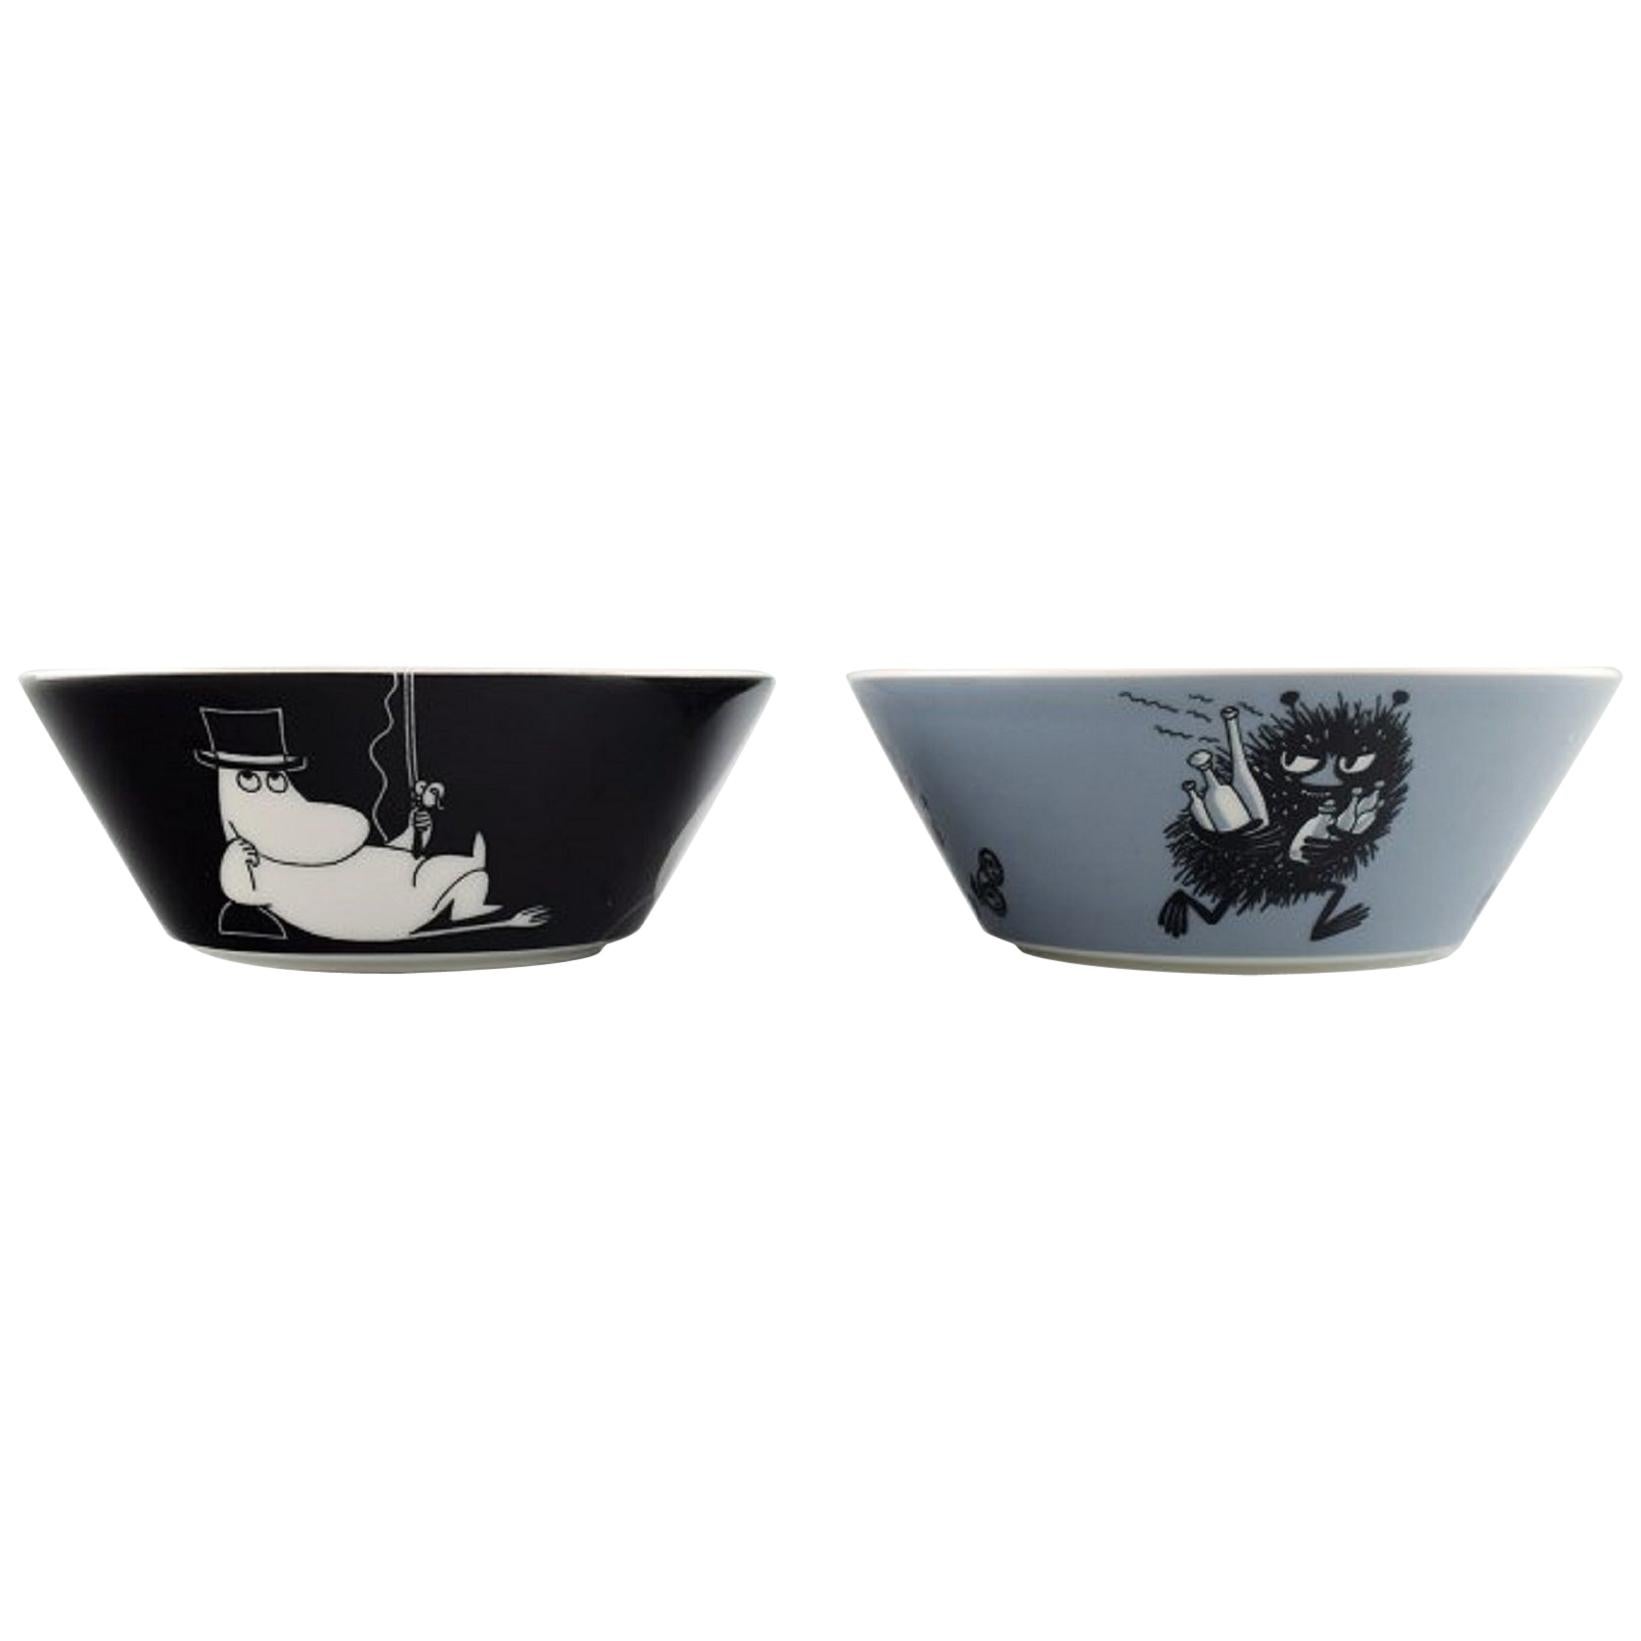 Arabia, Finland Two Porcelain Bowls with Motifs from "Moomin", Late 20th Century For Sale